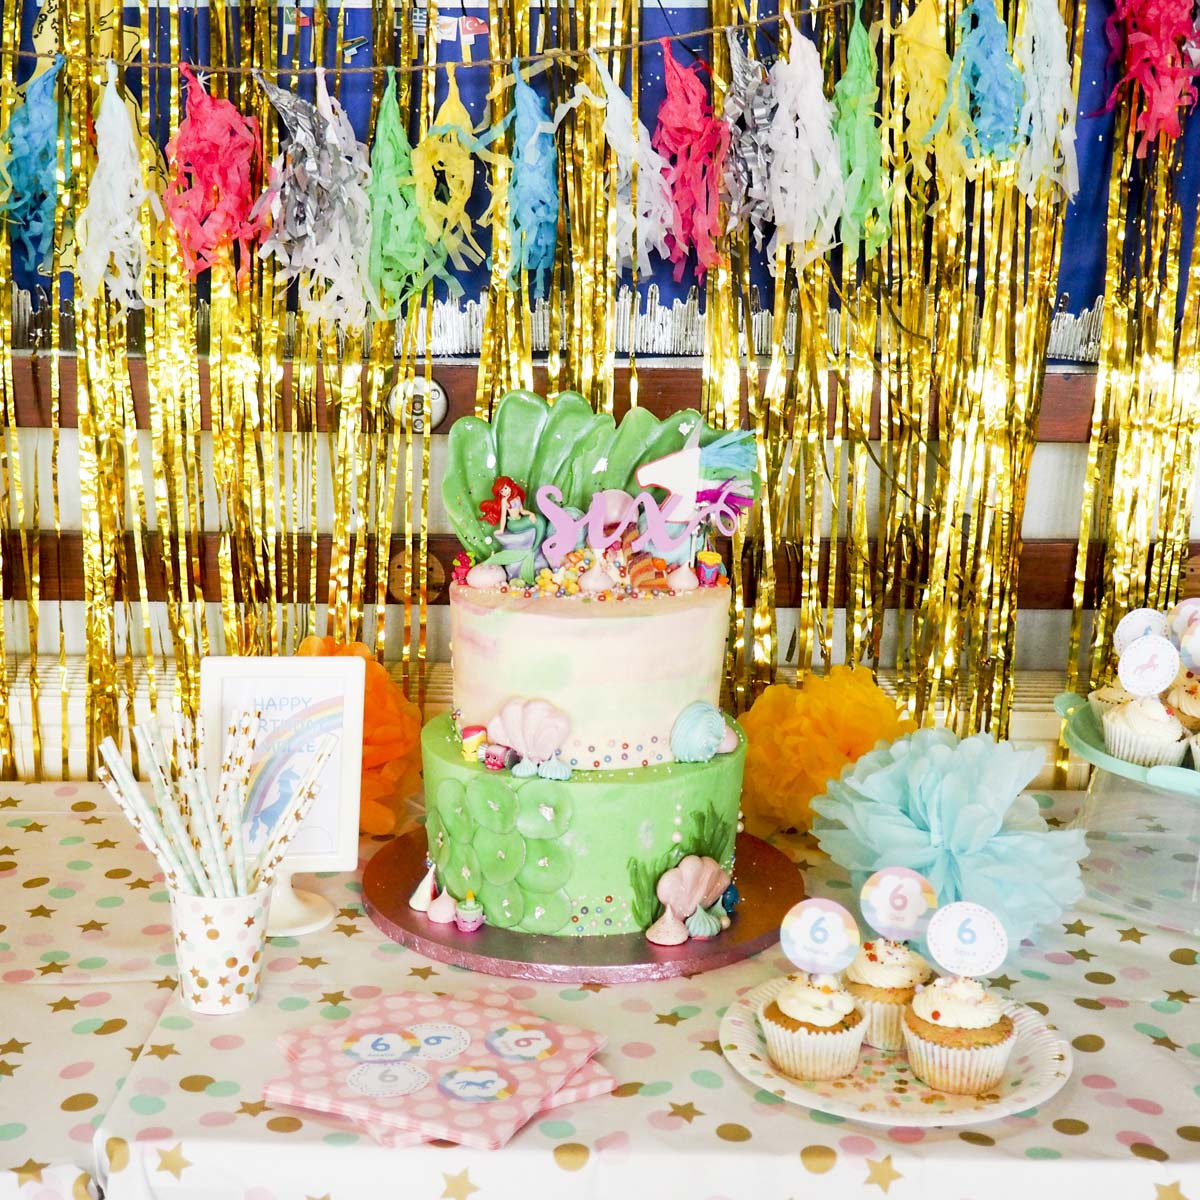 6 Year Old Birthday Party
 Mermaids Unicorns and Rainbows The 6 Year Old s Birthday